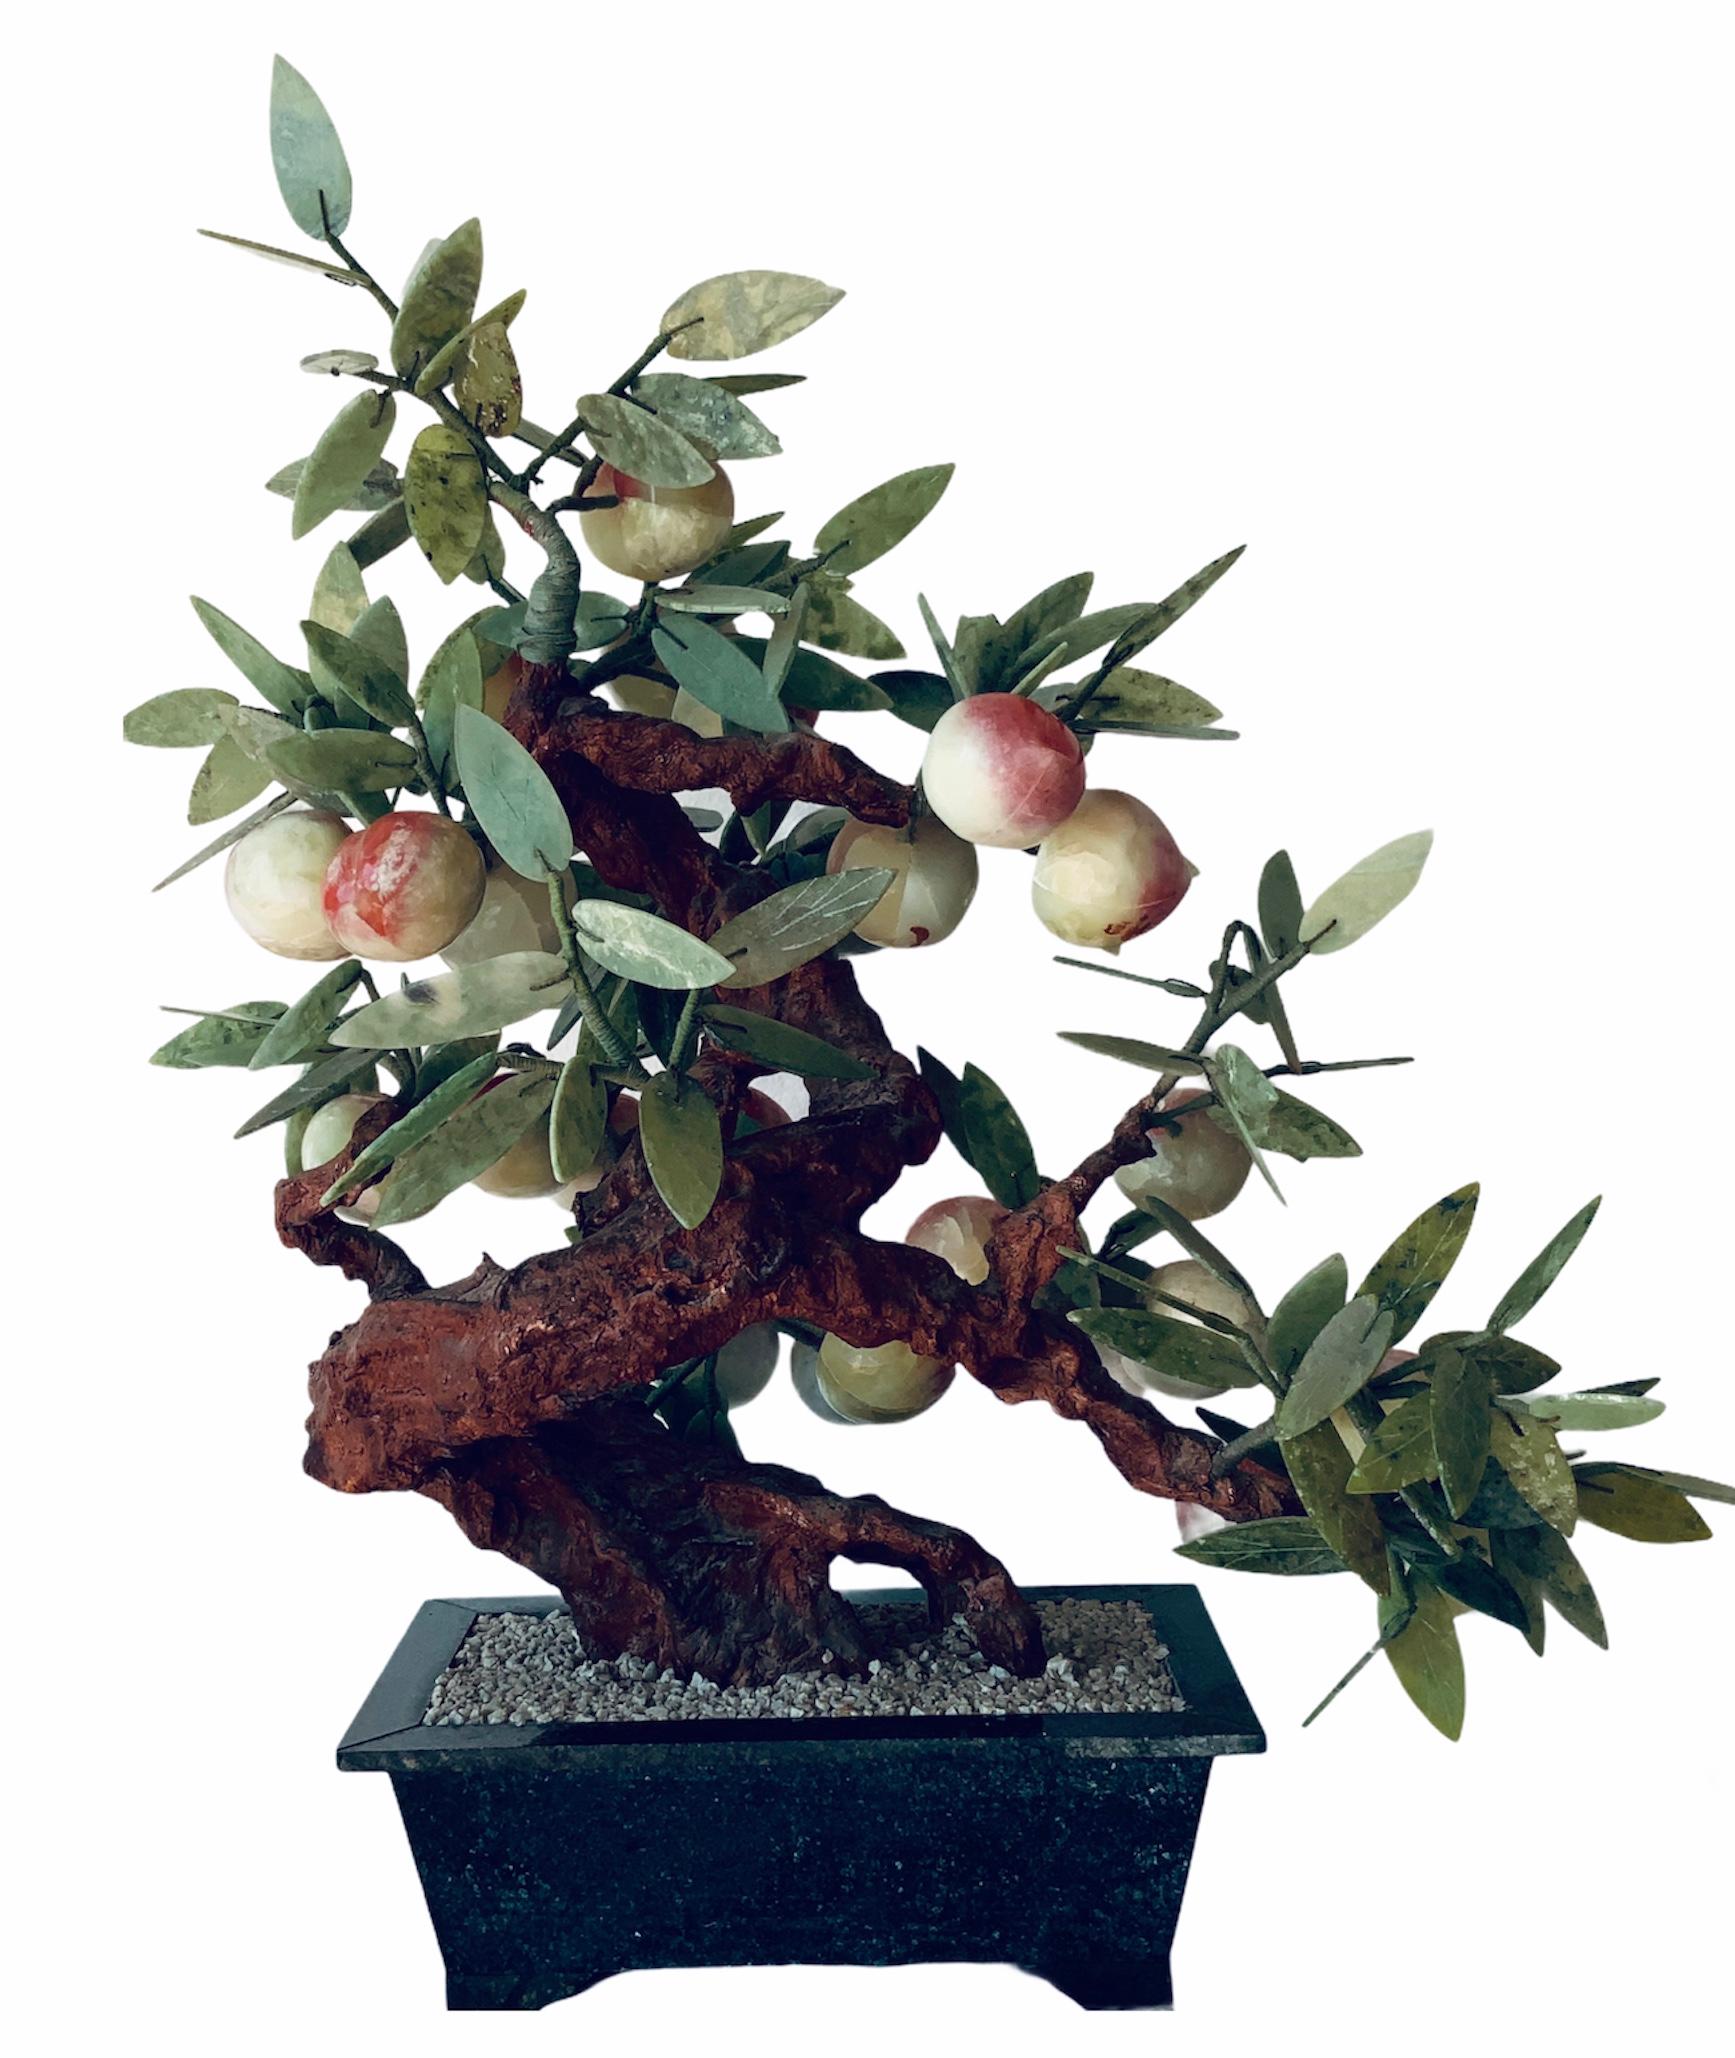 This is a peach tree bonsai. The peaches are made of coral yellow green colored hardstones and the leaves are made of nephrite jade. The tree is standing in a dark green marble rectangular planter that is full of white pebbles. There are some